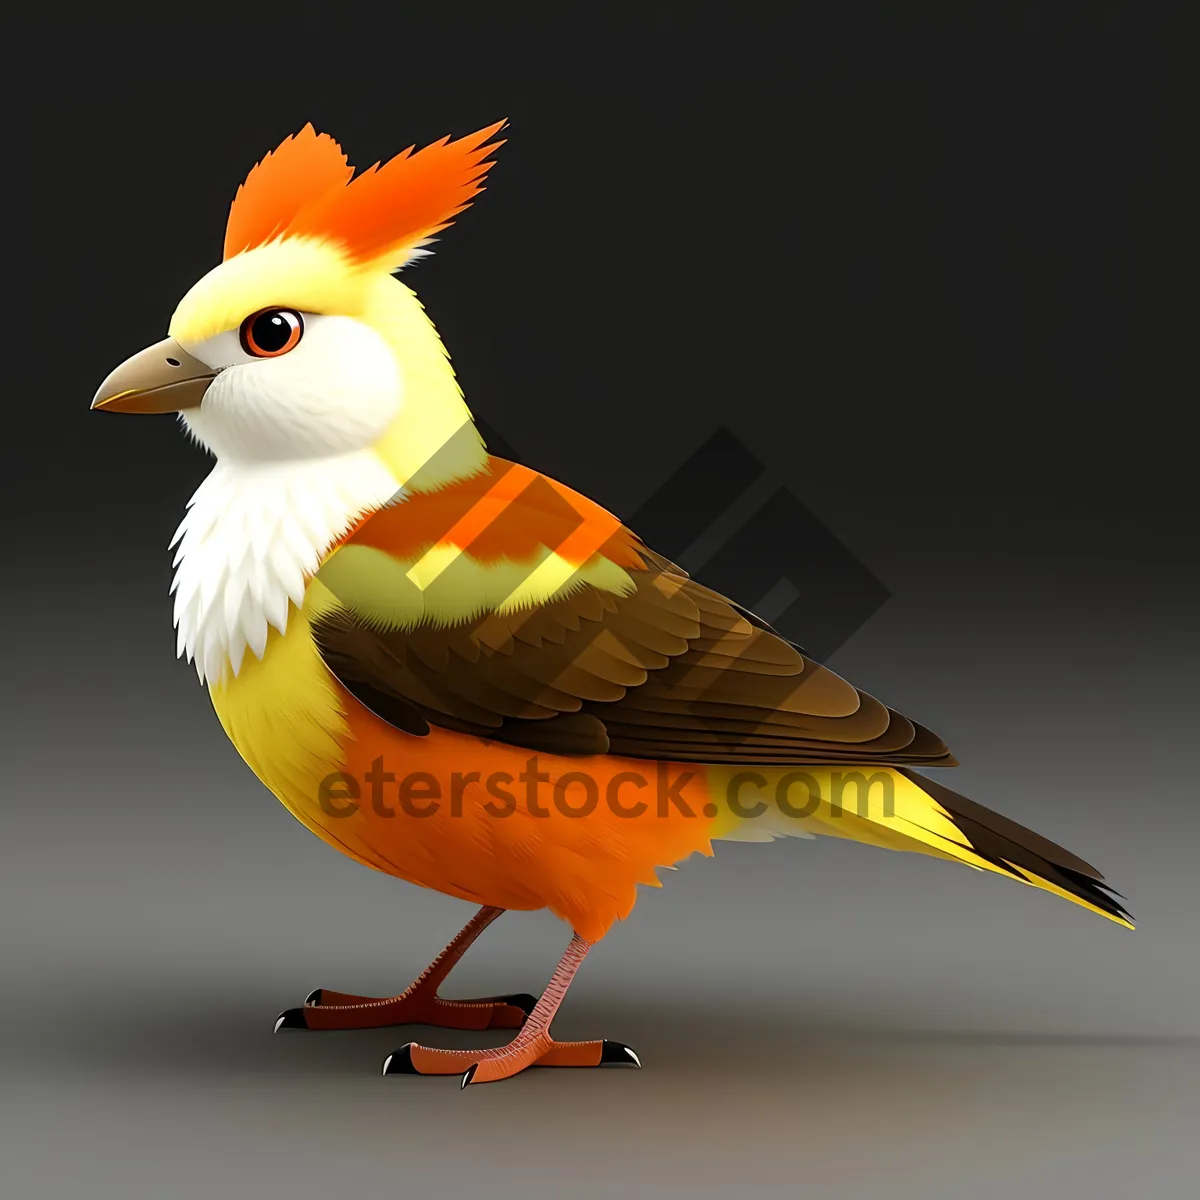 Picture of Yellow Feathered Bird in Studio Environment